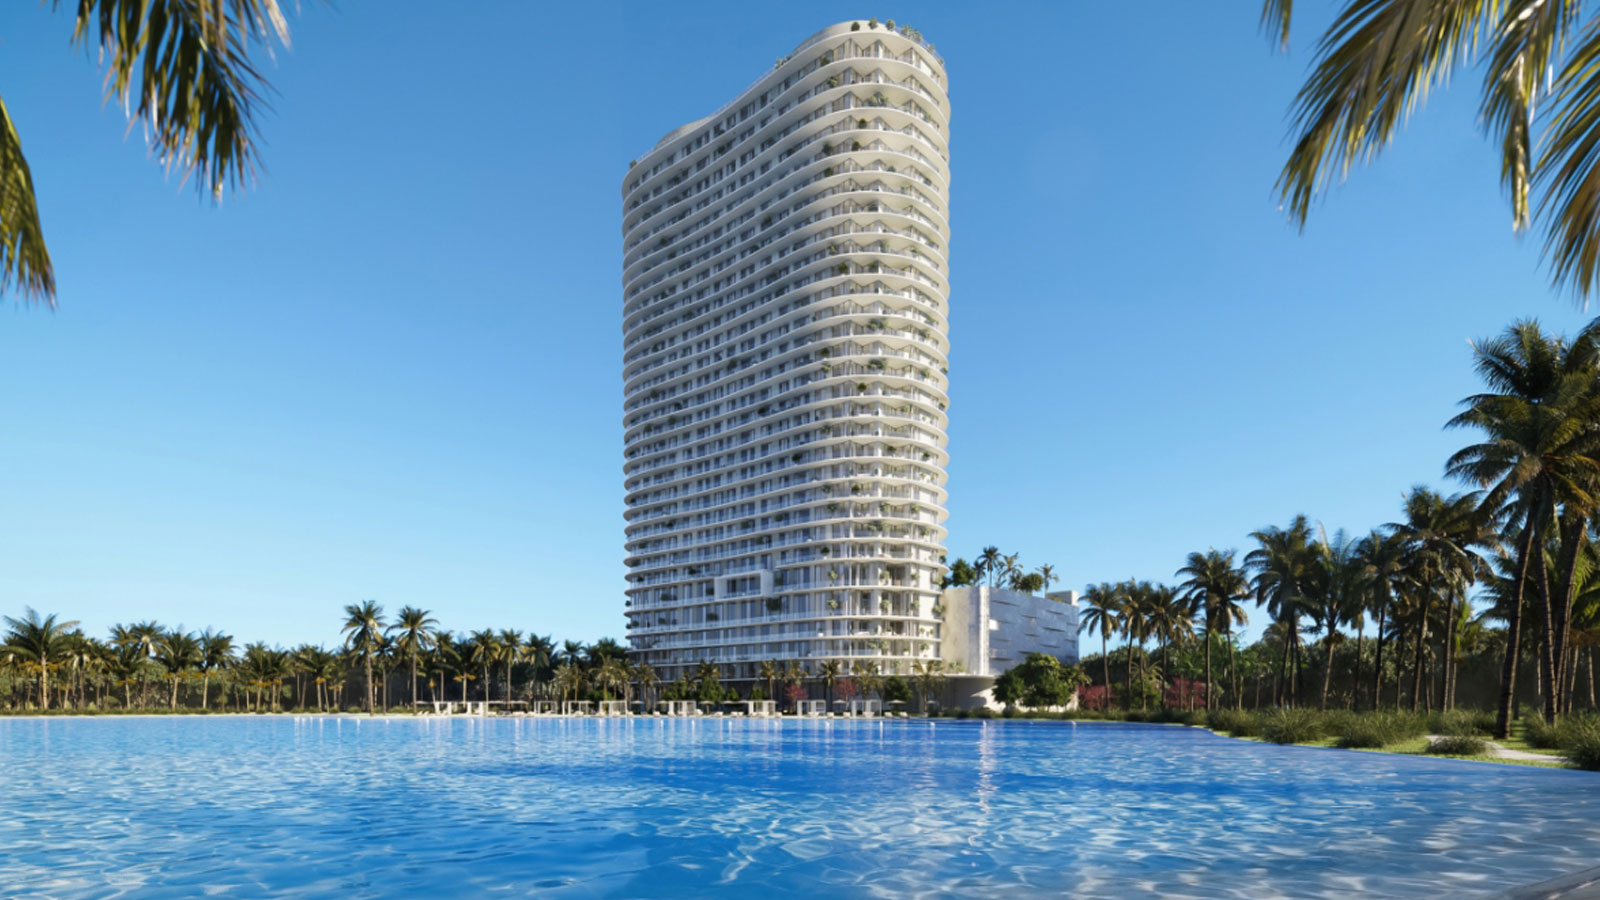 ONE Park Tower by Turnberry